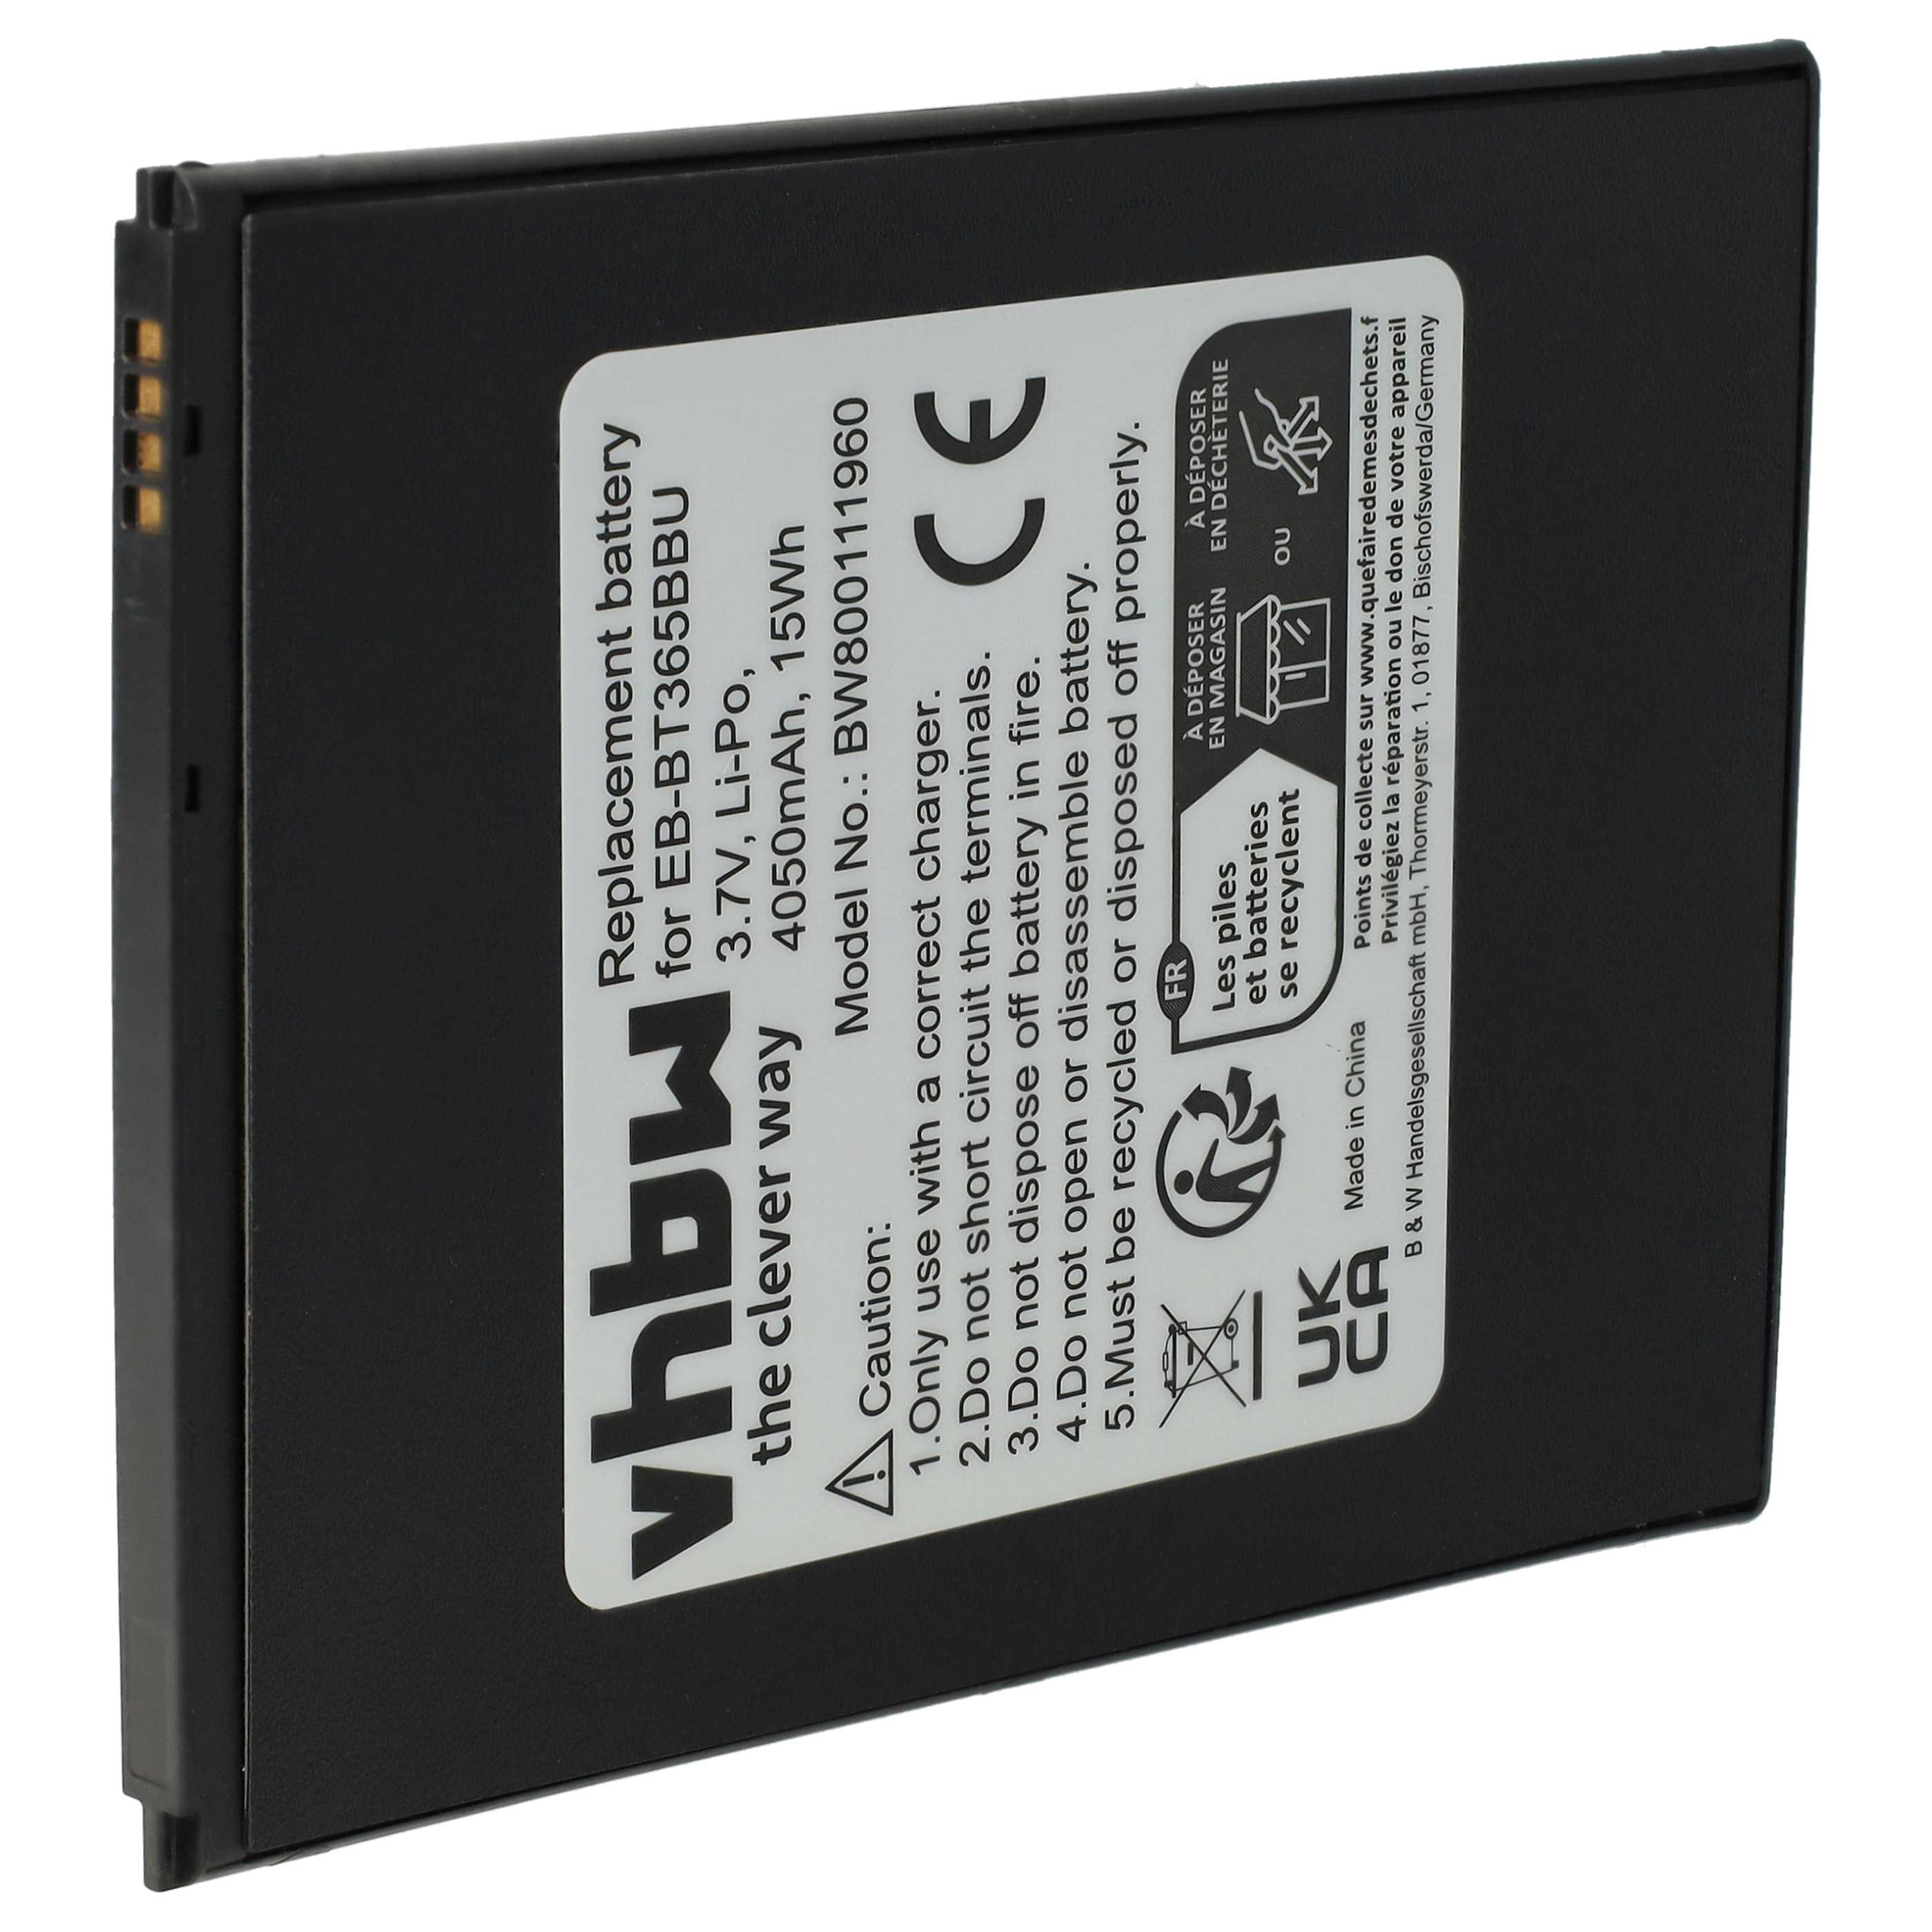 Tablet Replacement Battery for Samsung Galaxy Tab Active, Active 2, Active 2 LTE - 4050 mAh 3.7 V Li-polymer